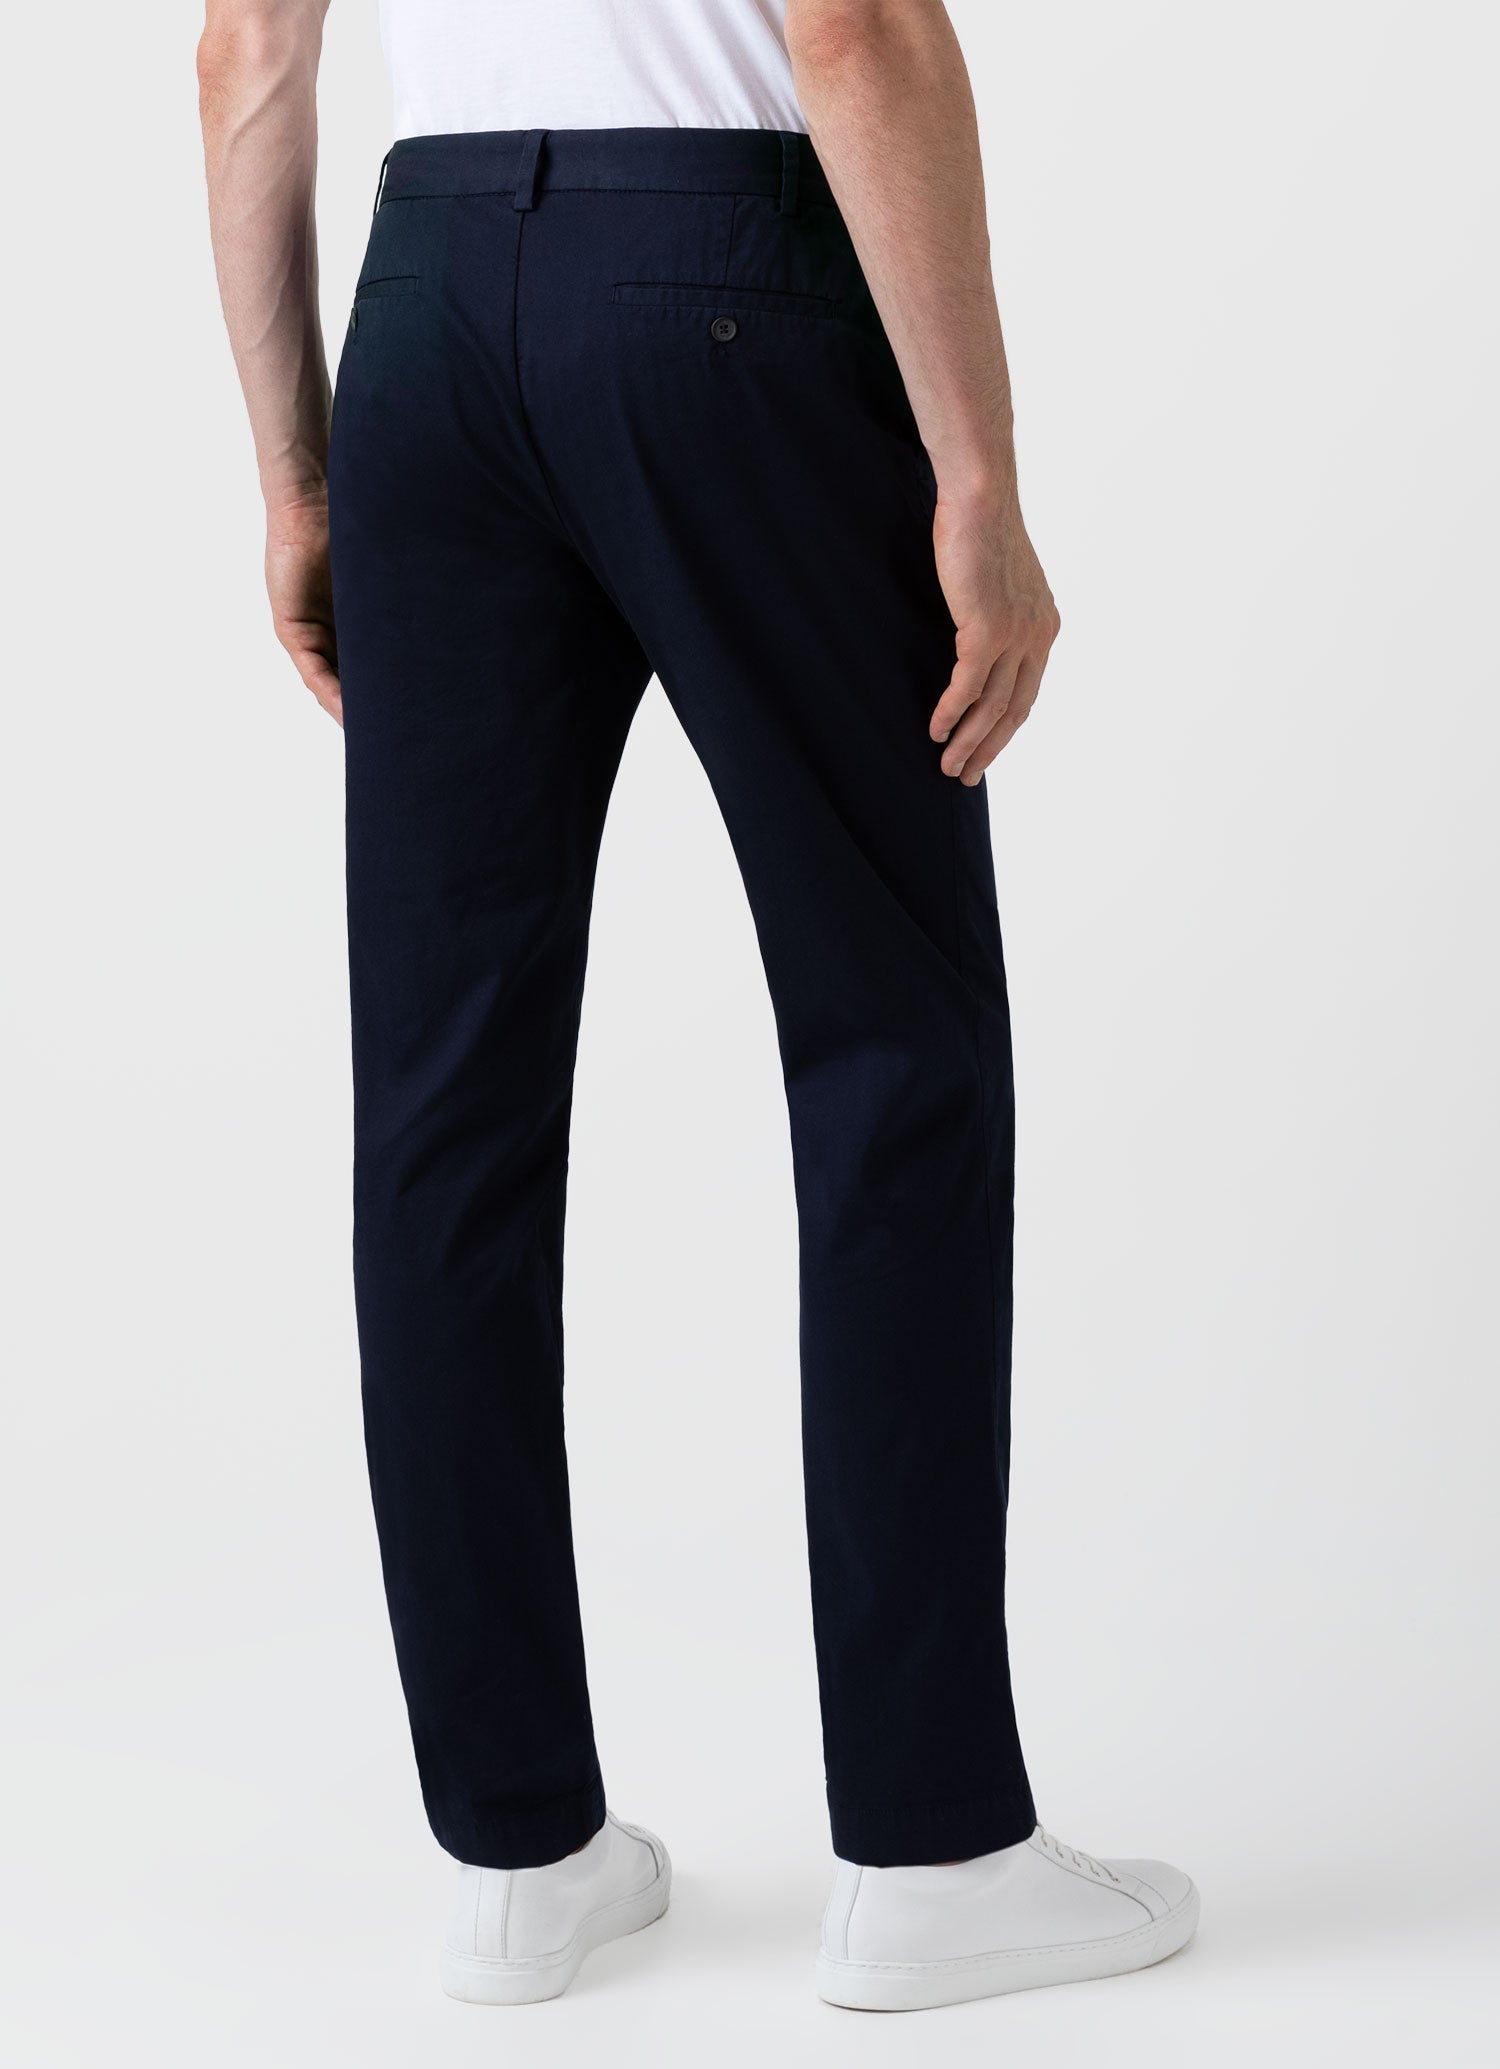 Navy Slim Fit Suit Trousers | New Look